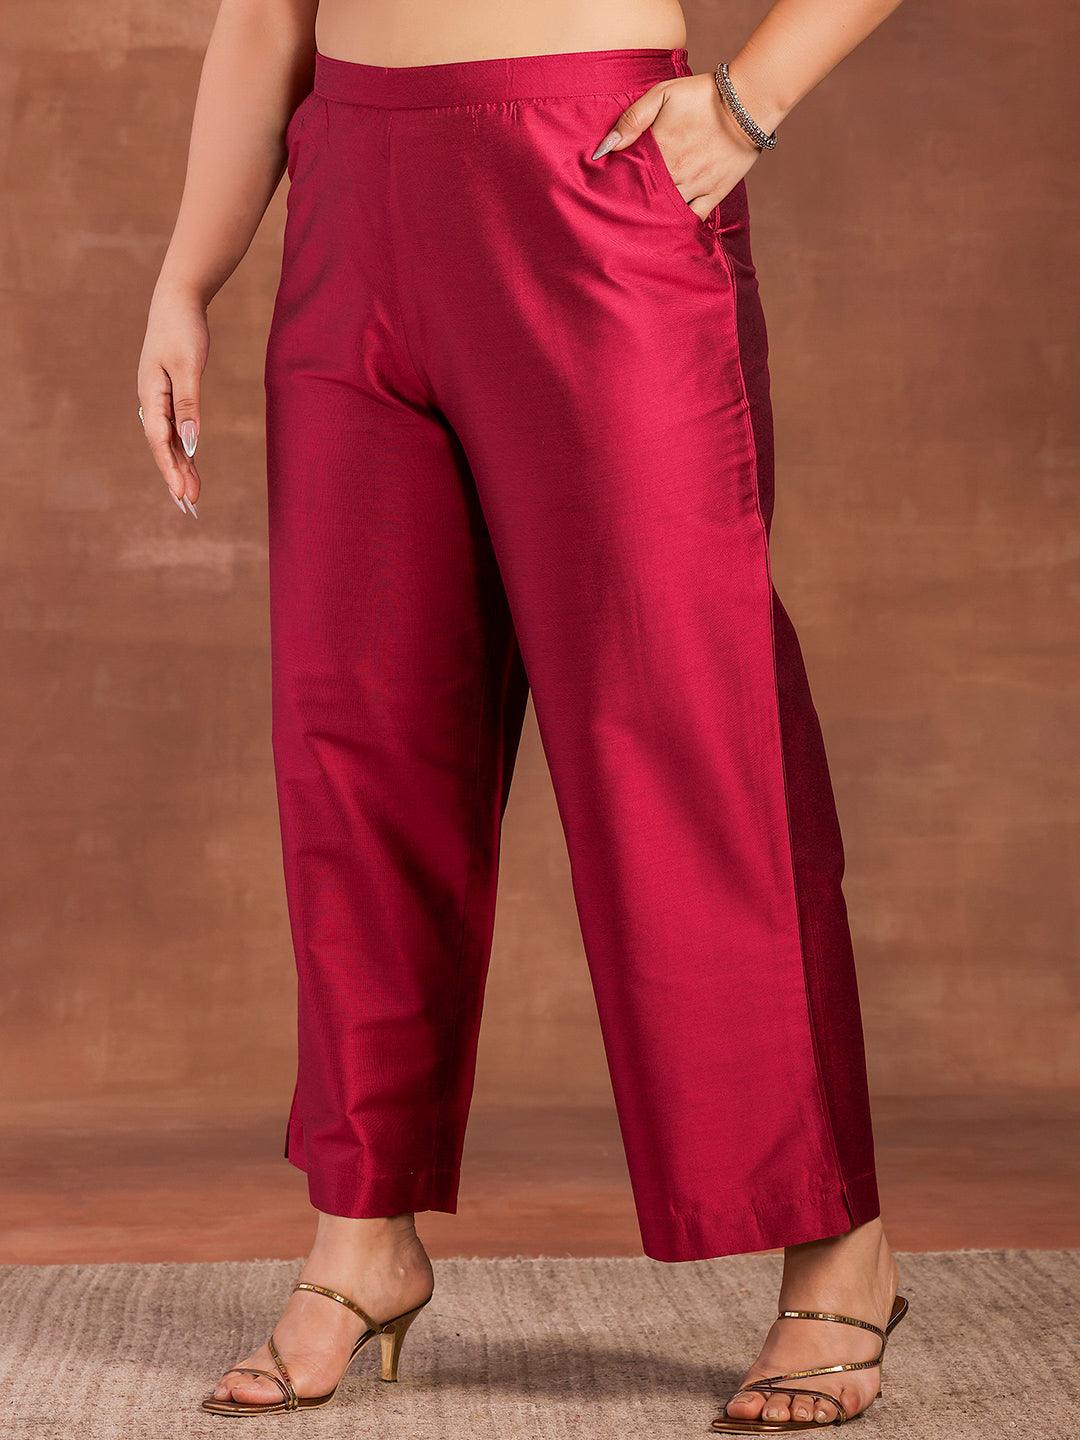 Plus Size Magenta Solid Silk Blend Straight Suit With Dupatta - Libas